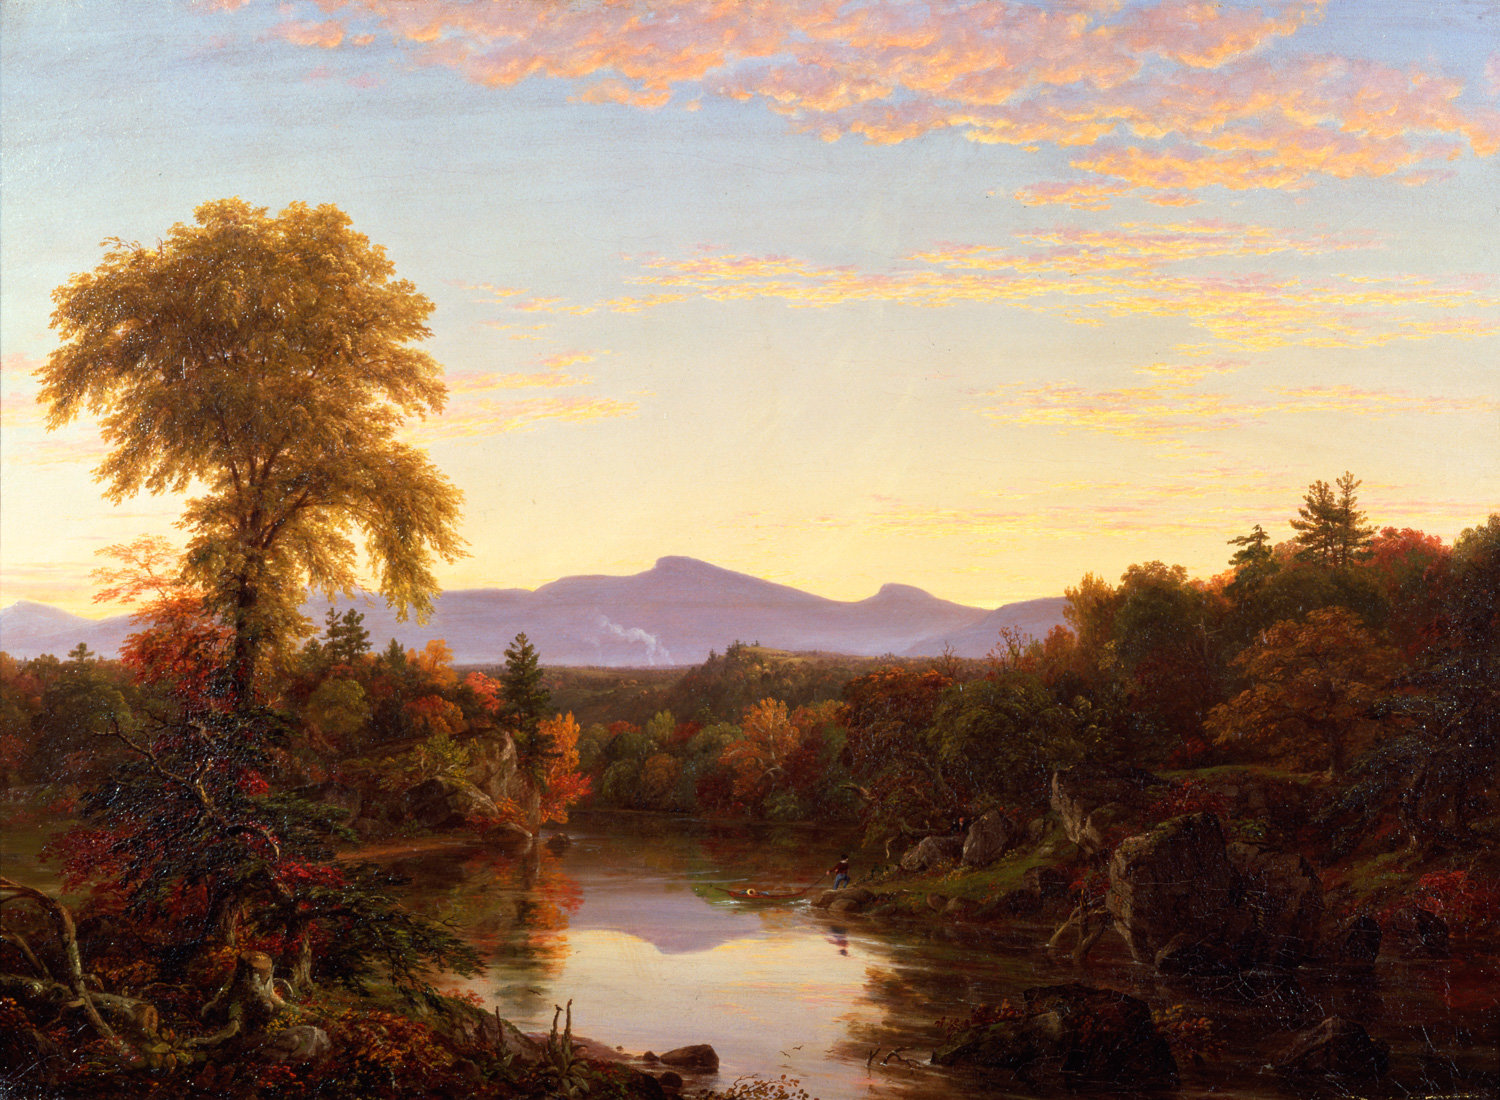 Thomas Cole's painting 'On Catskill Creek, Sunset' is one of a dozen in the exhibition 'Thomas Cole's Refrain: The Paintings of Catskill Creek,' on display at the Hudson River Museum through Feb. 23.